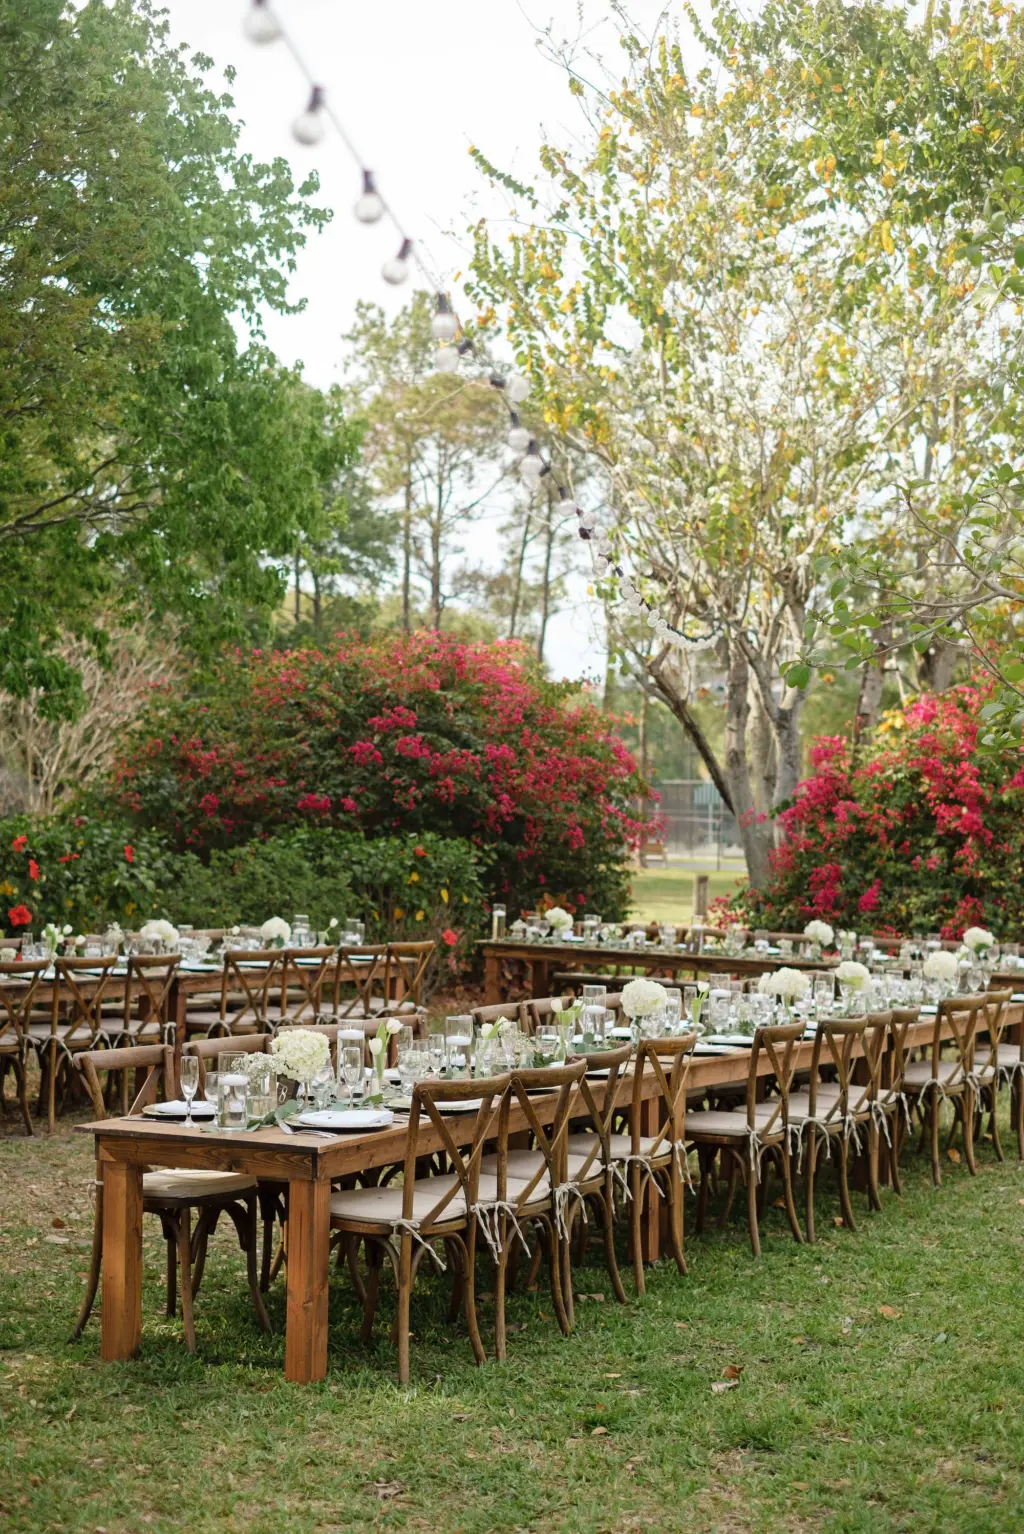 Long Feasting Tables with Wooden Crossback Chairs | Floating Candles, White Hydrangeas and Tulip Wedding Reception Centerpiece Decor | Tampa Planner The Olive Tree Weddings | Venue Davis Island Garden Club